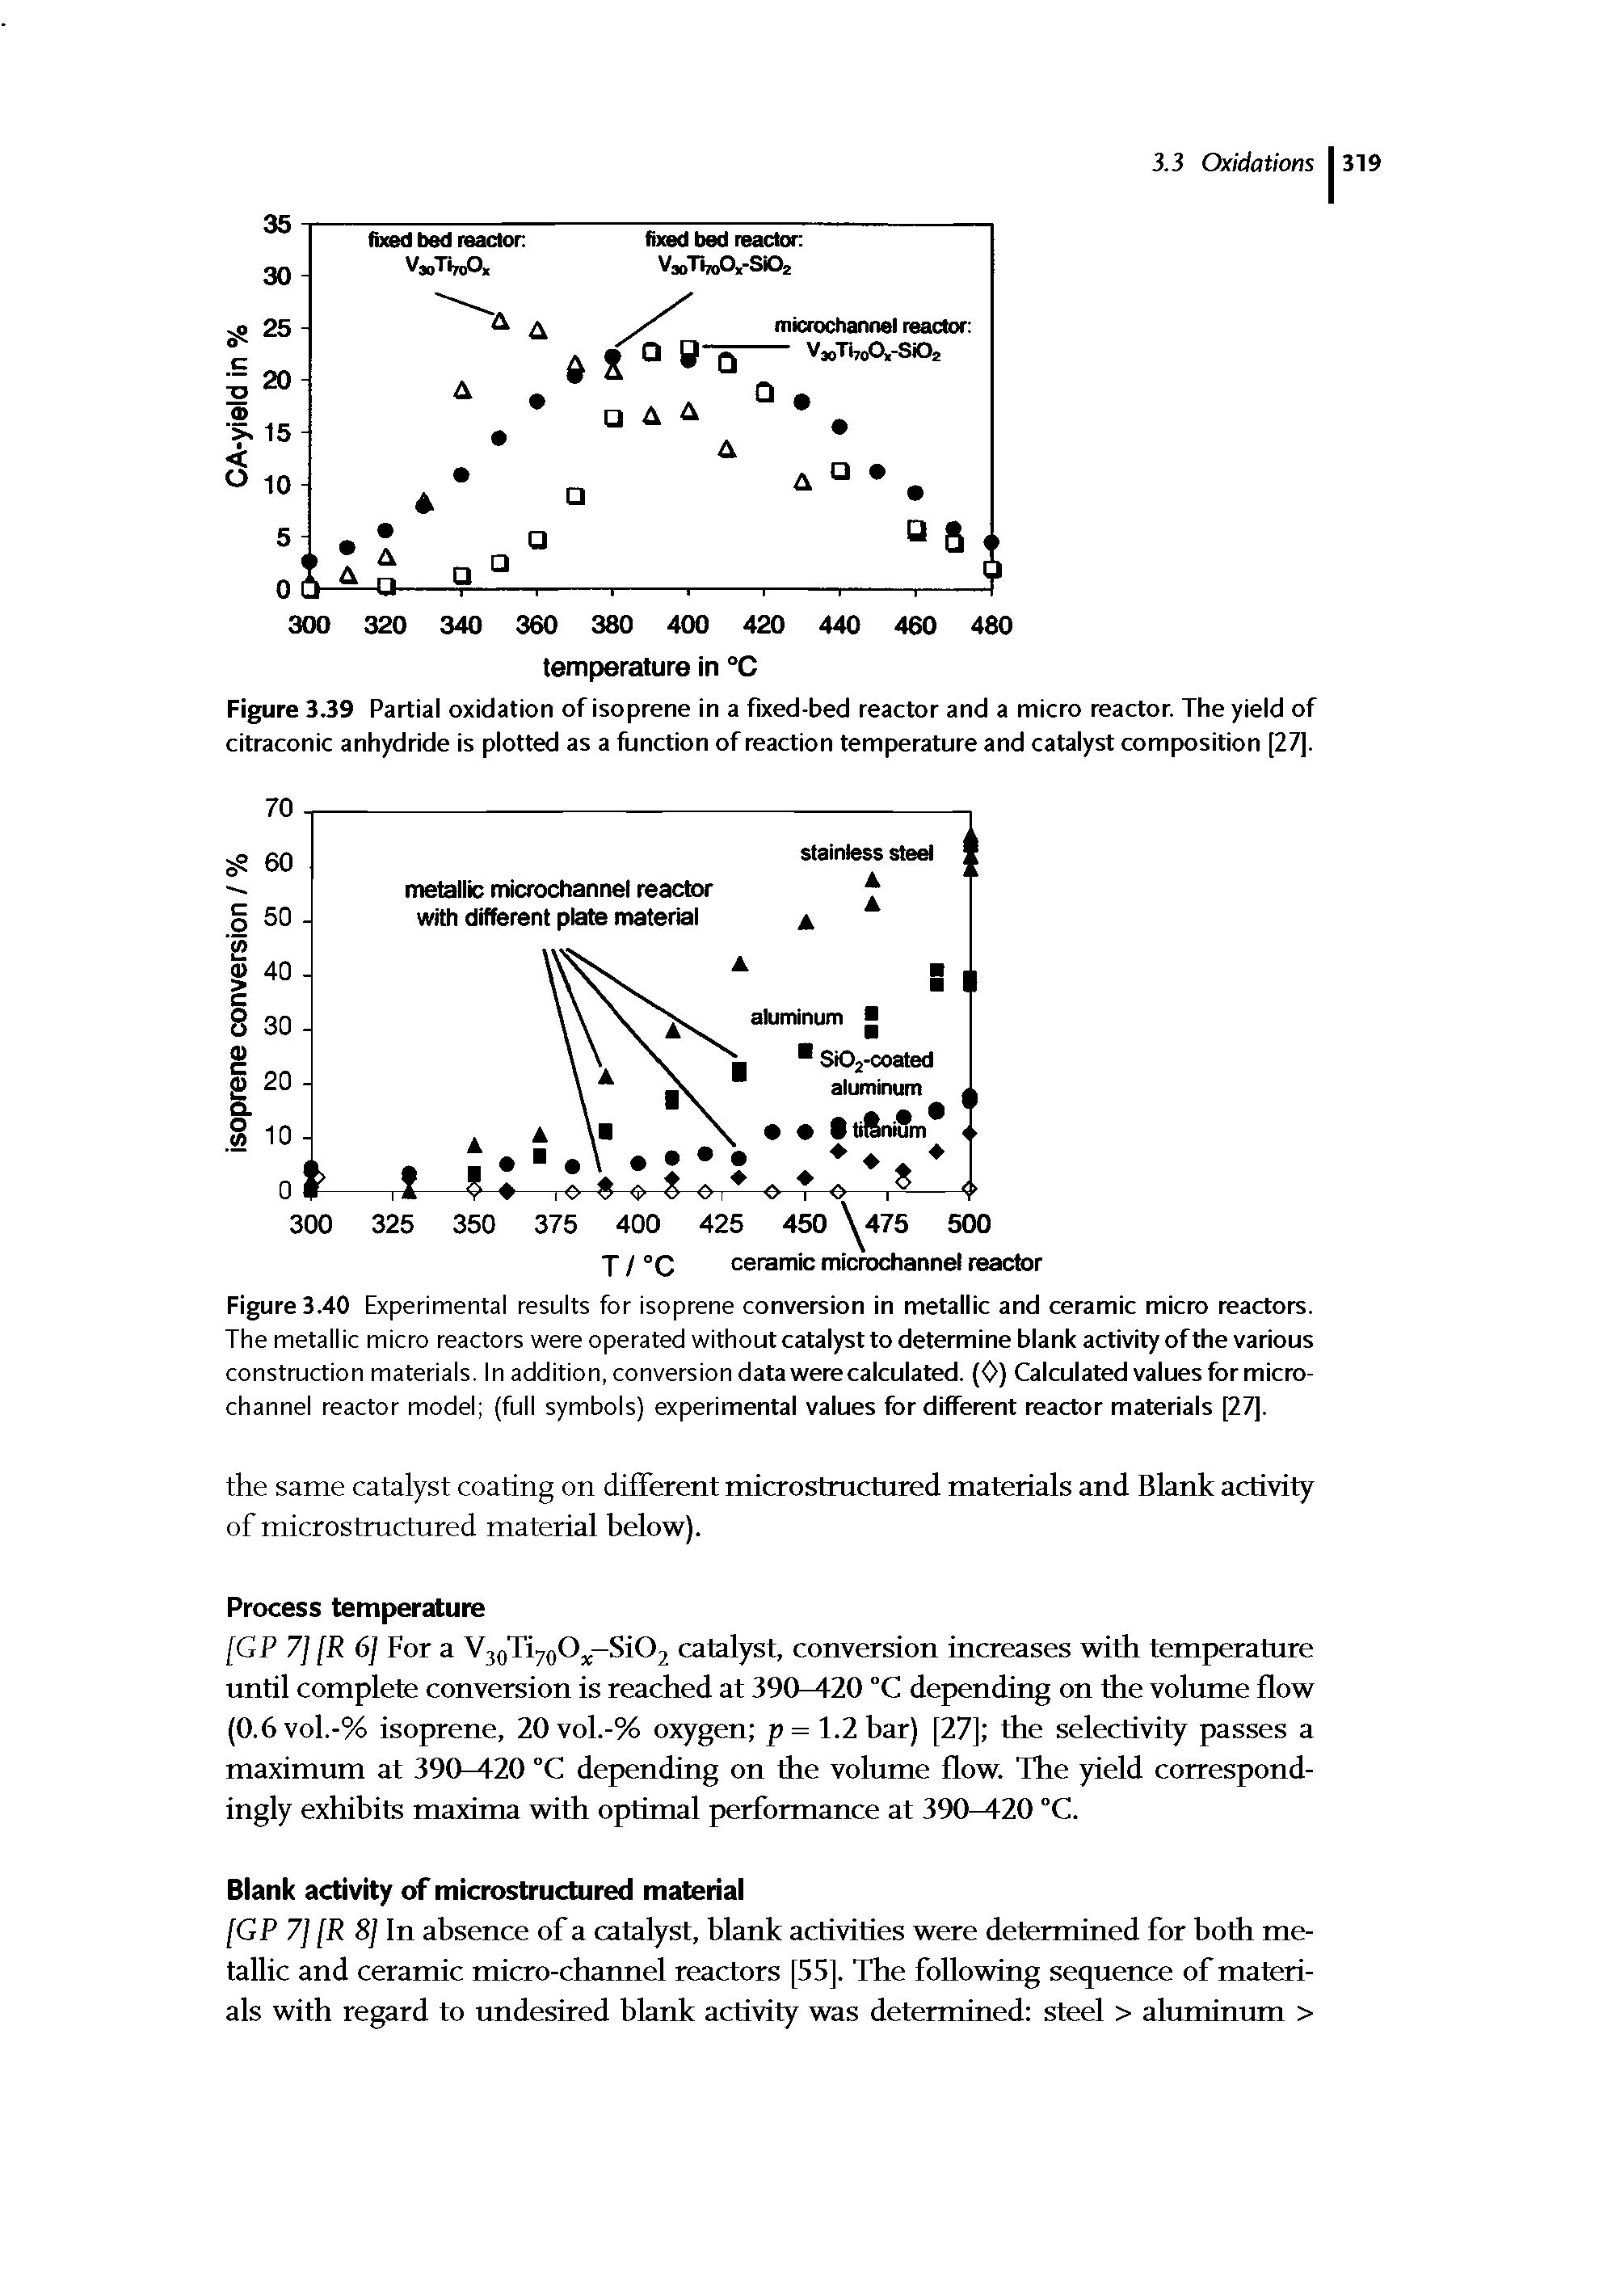 Figure 3.40 Experimental results for isoprene conversion in metallic and ceramic micro reactors. The metallic micro reactors were operated without catalyst to determine blank activity of the various construction materials. In addition, conversion data were calculated. (0) Calculated values for micro-channel reactor model (full symbols) experimental values for different reactor materials [27].